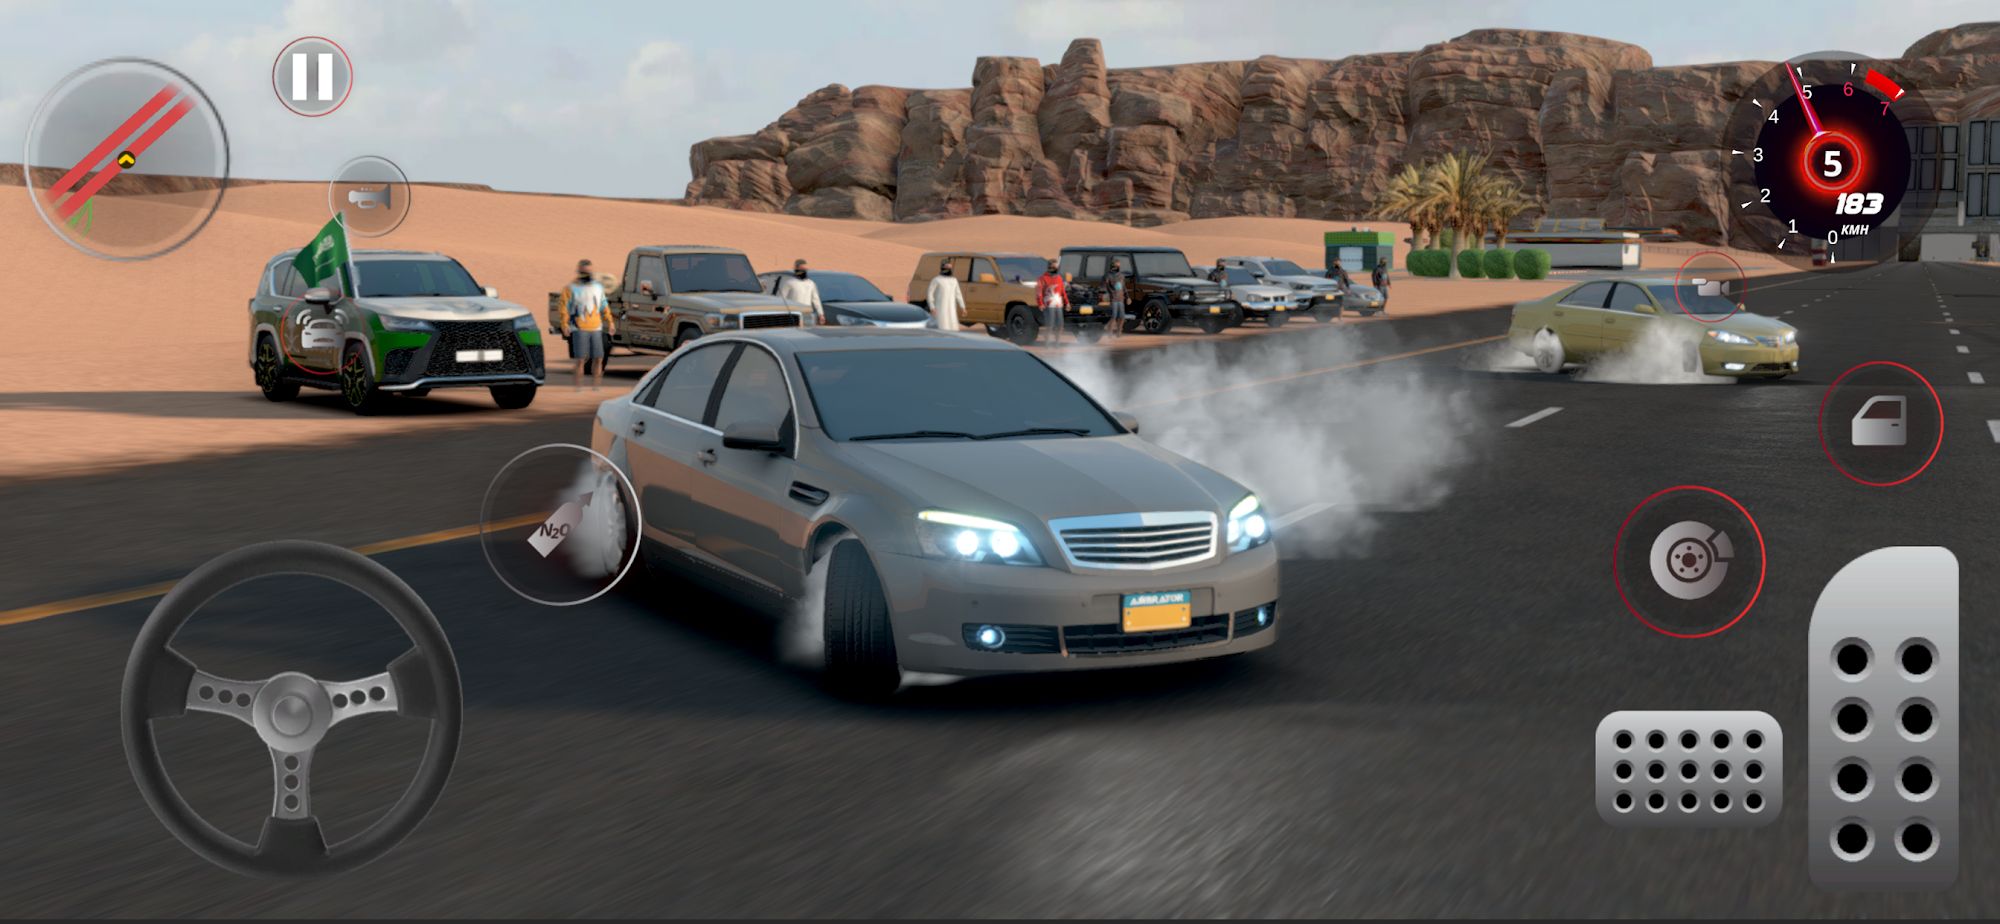 Full version of Android Drift game apk Drift for Life for tablet and phone.